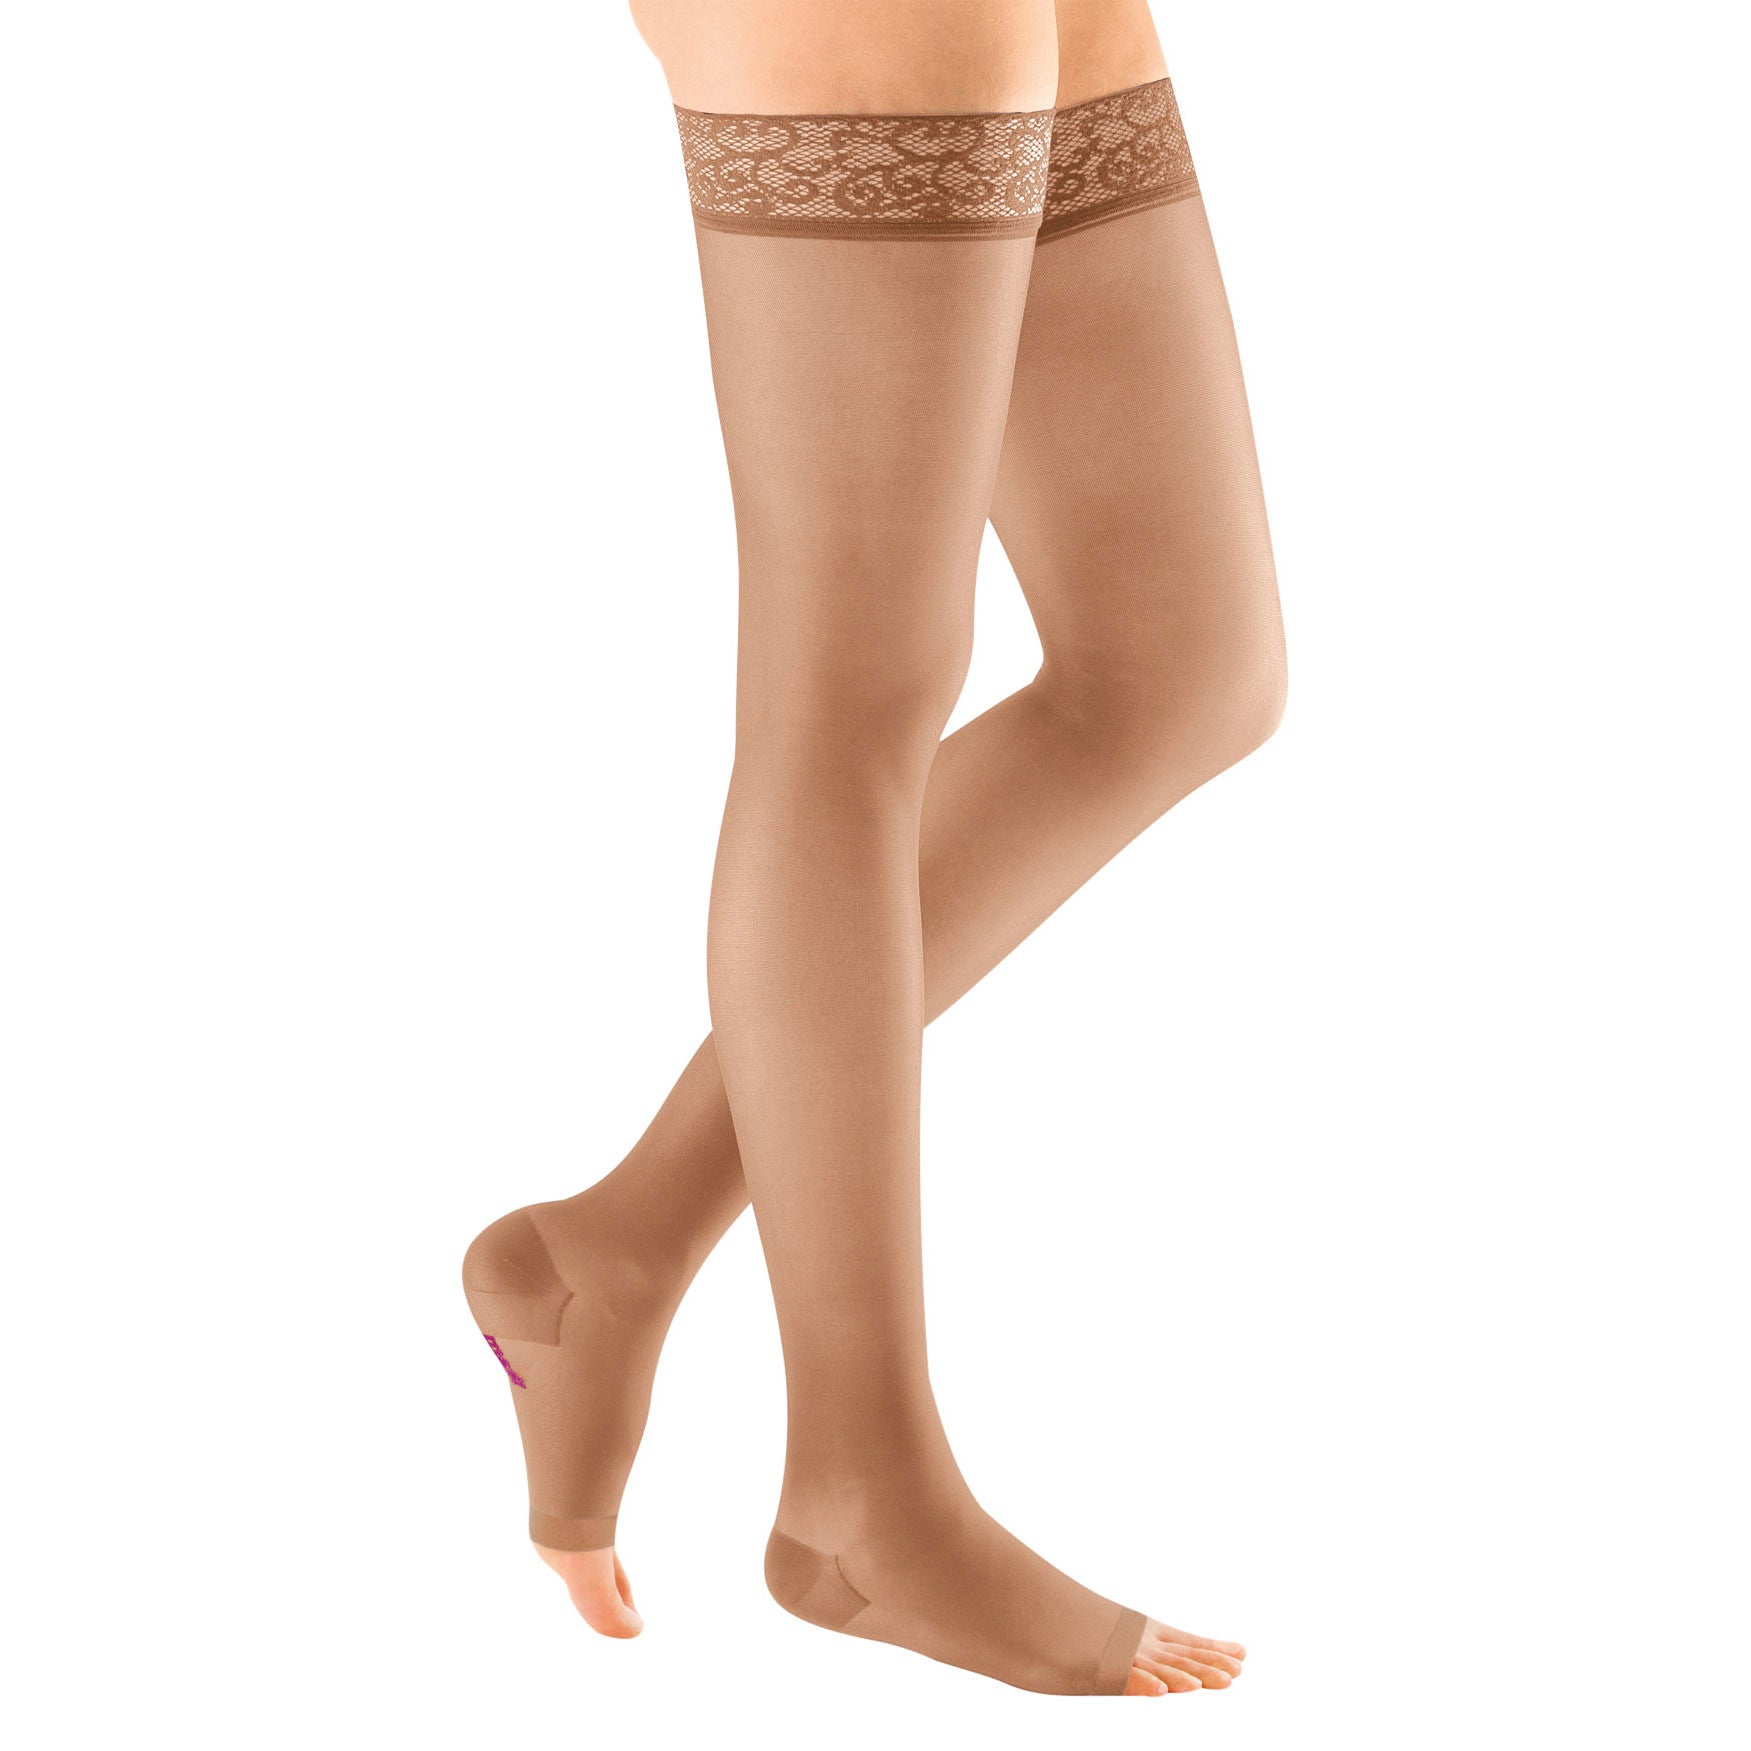 Medi Sheer & Soft Open Toe Thigh Highs w/ Lace Band - 20-30 mmHg